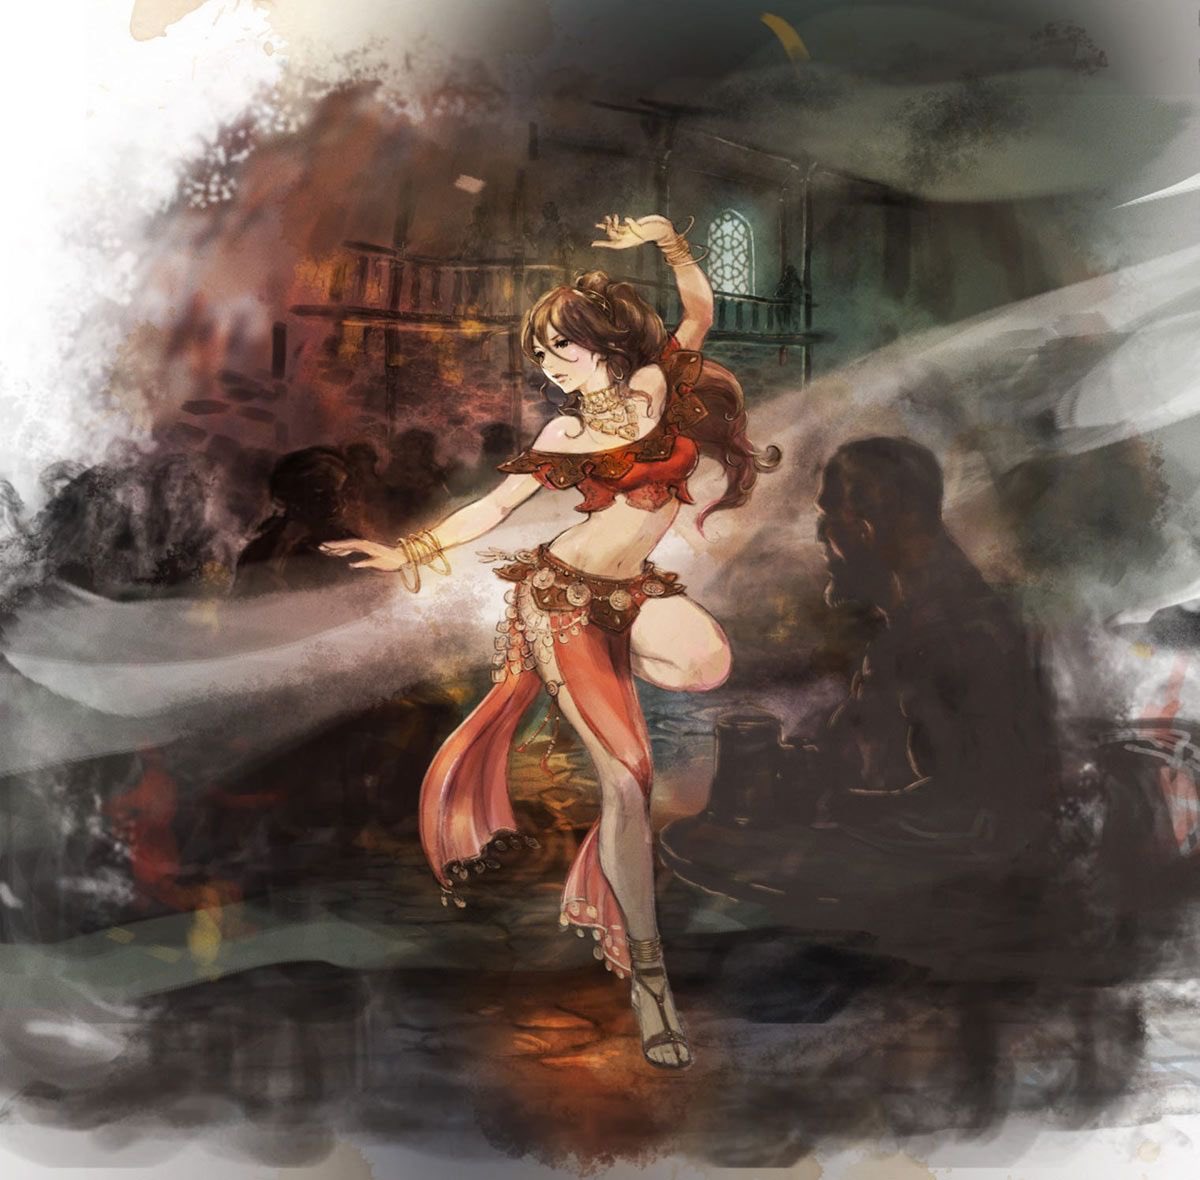 6. Primrose AzelhartShe’s a straight up badass and her path pretty much carried the Octopath Traveler story for me